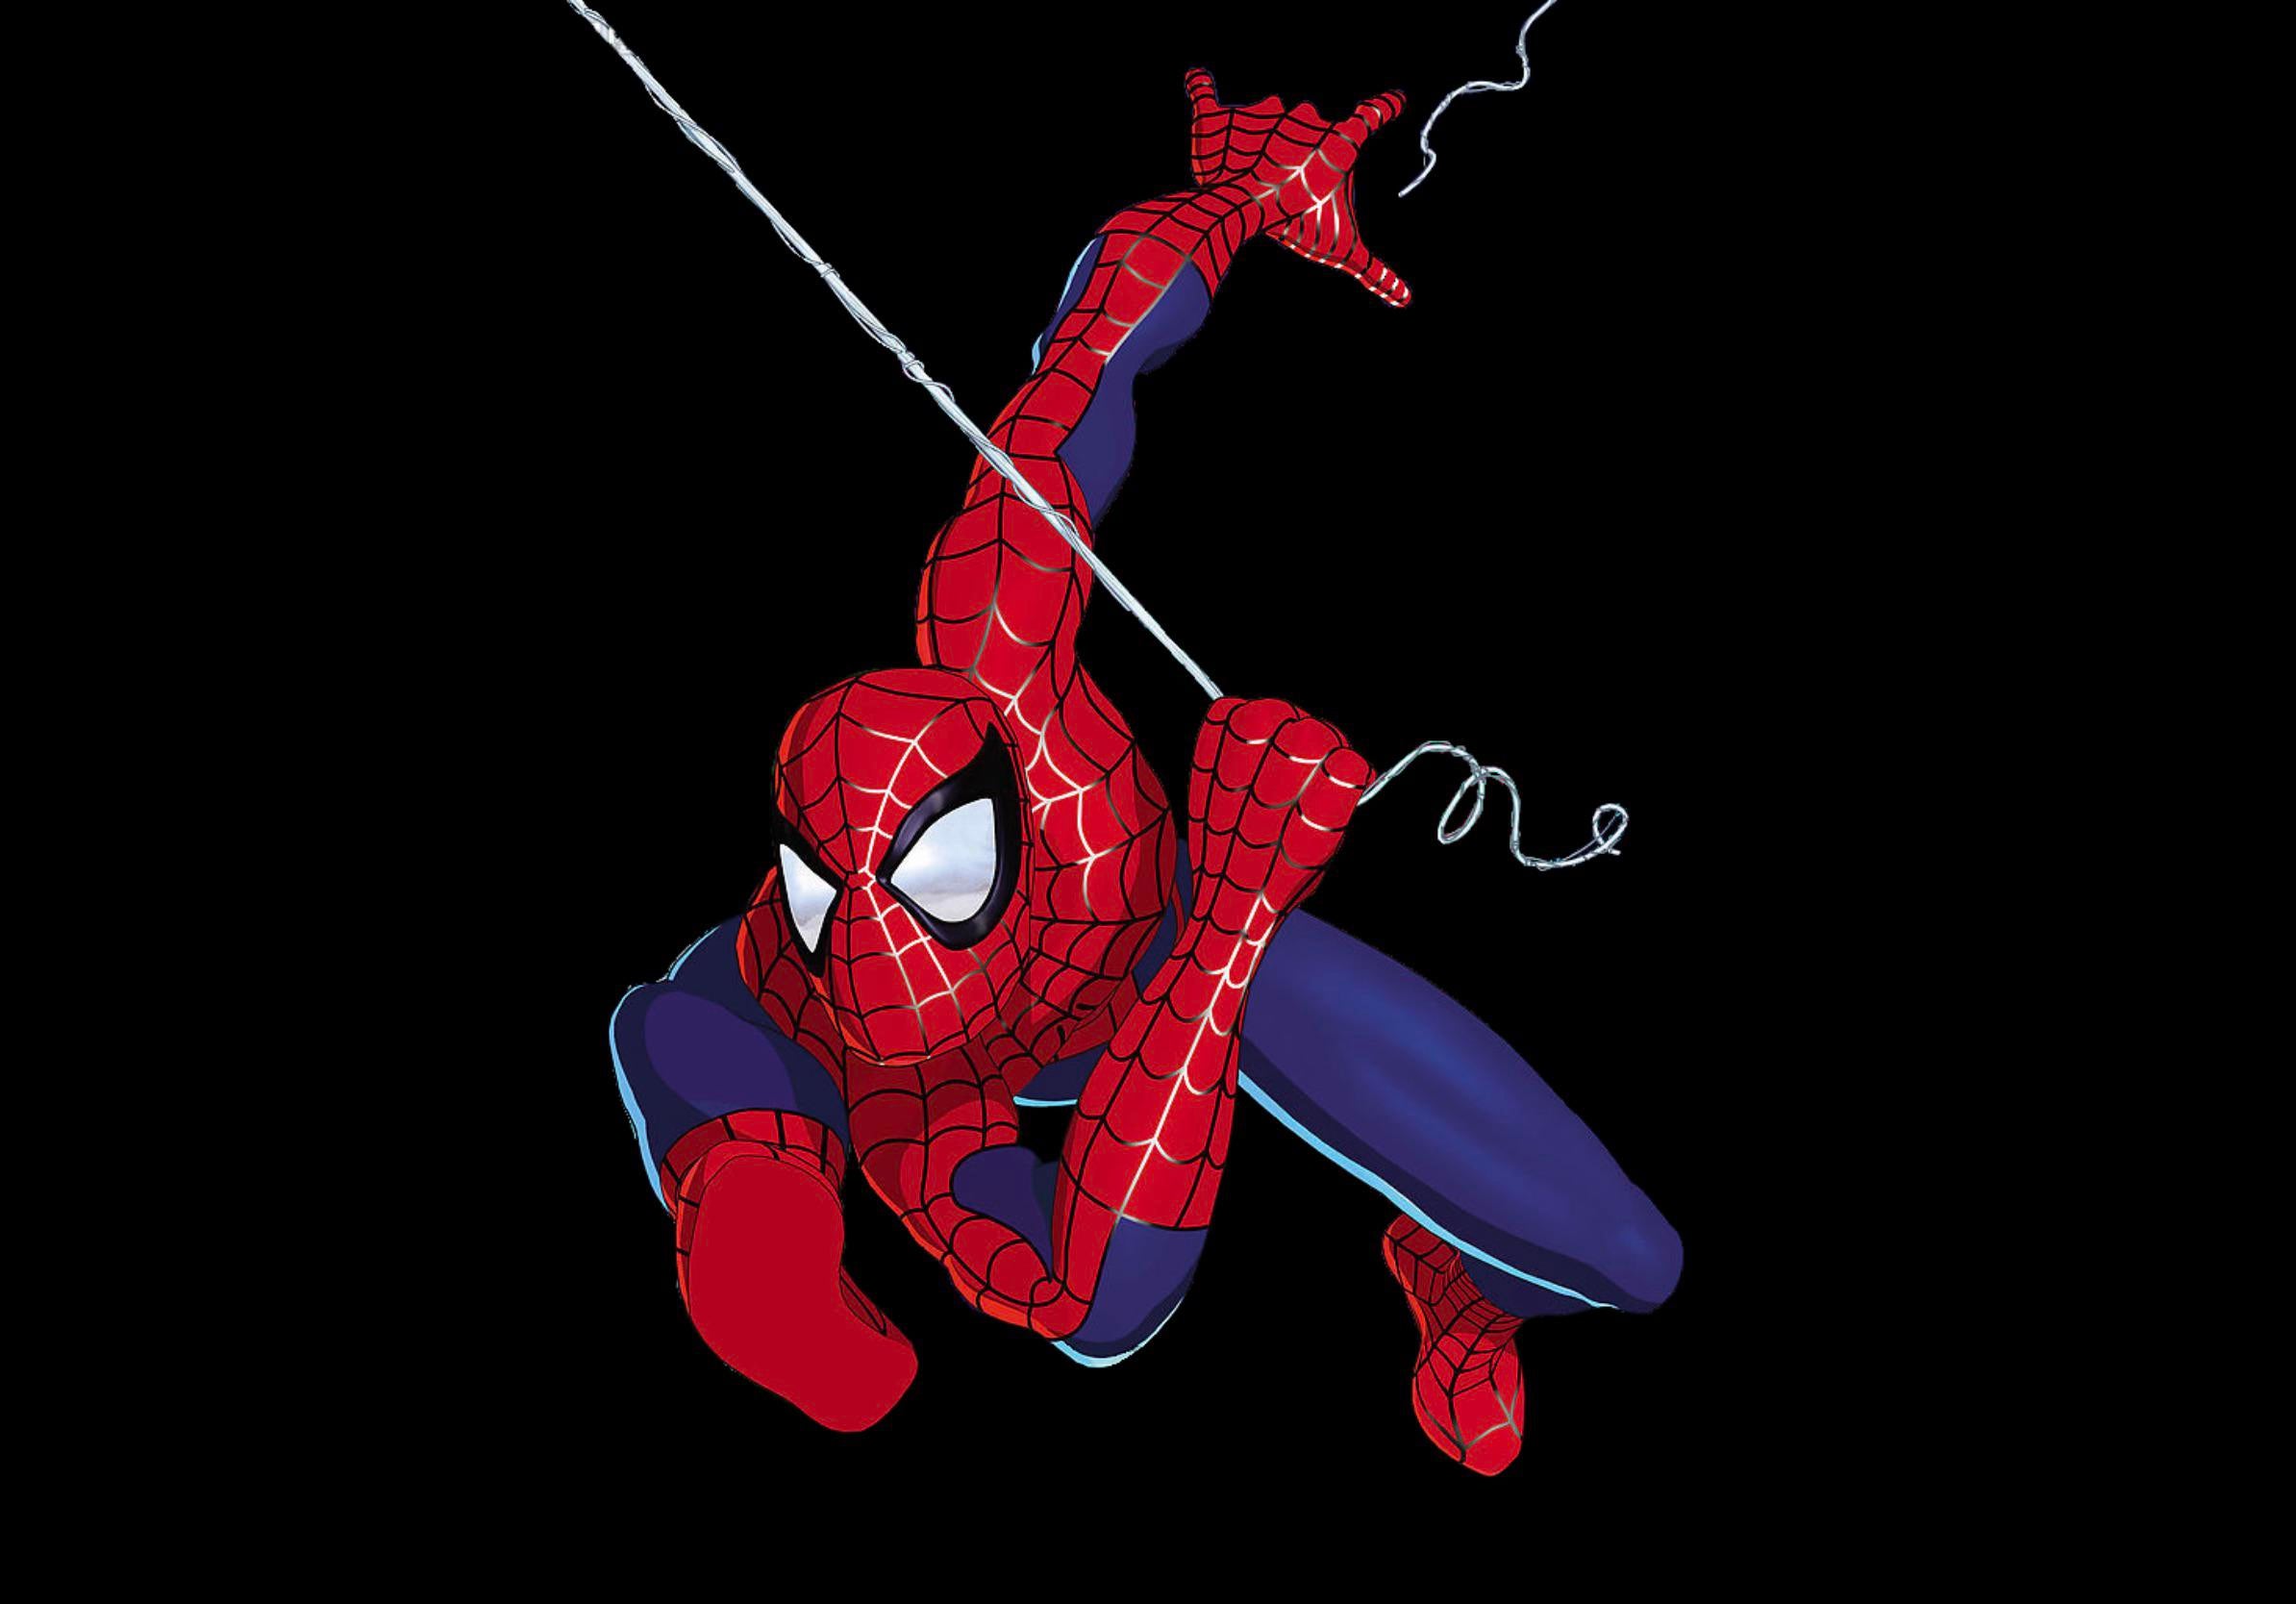 Cool Desktop Wallpaper! Spider Man The New Animated Series!